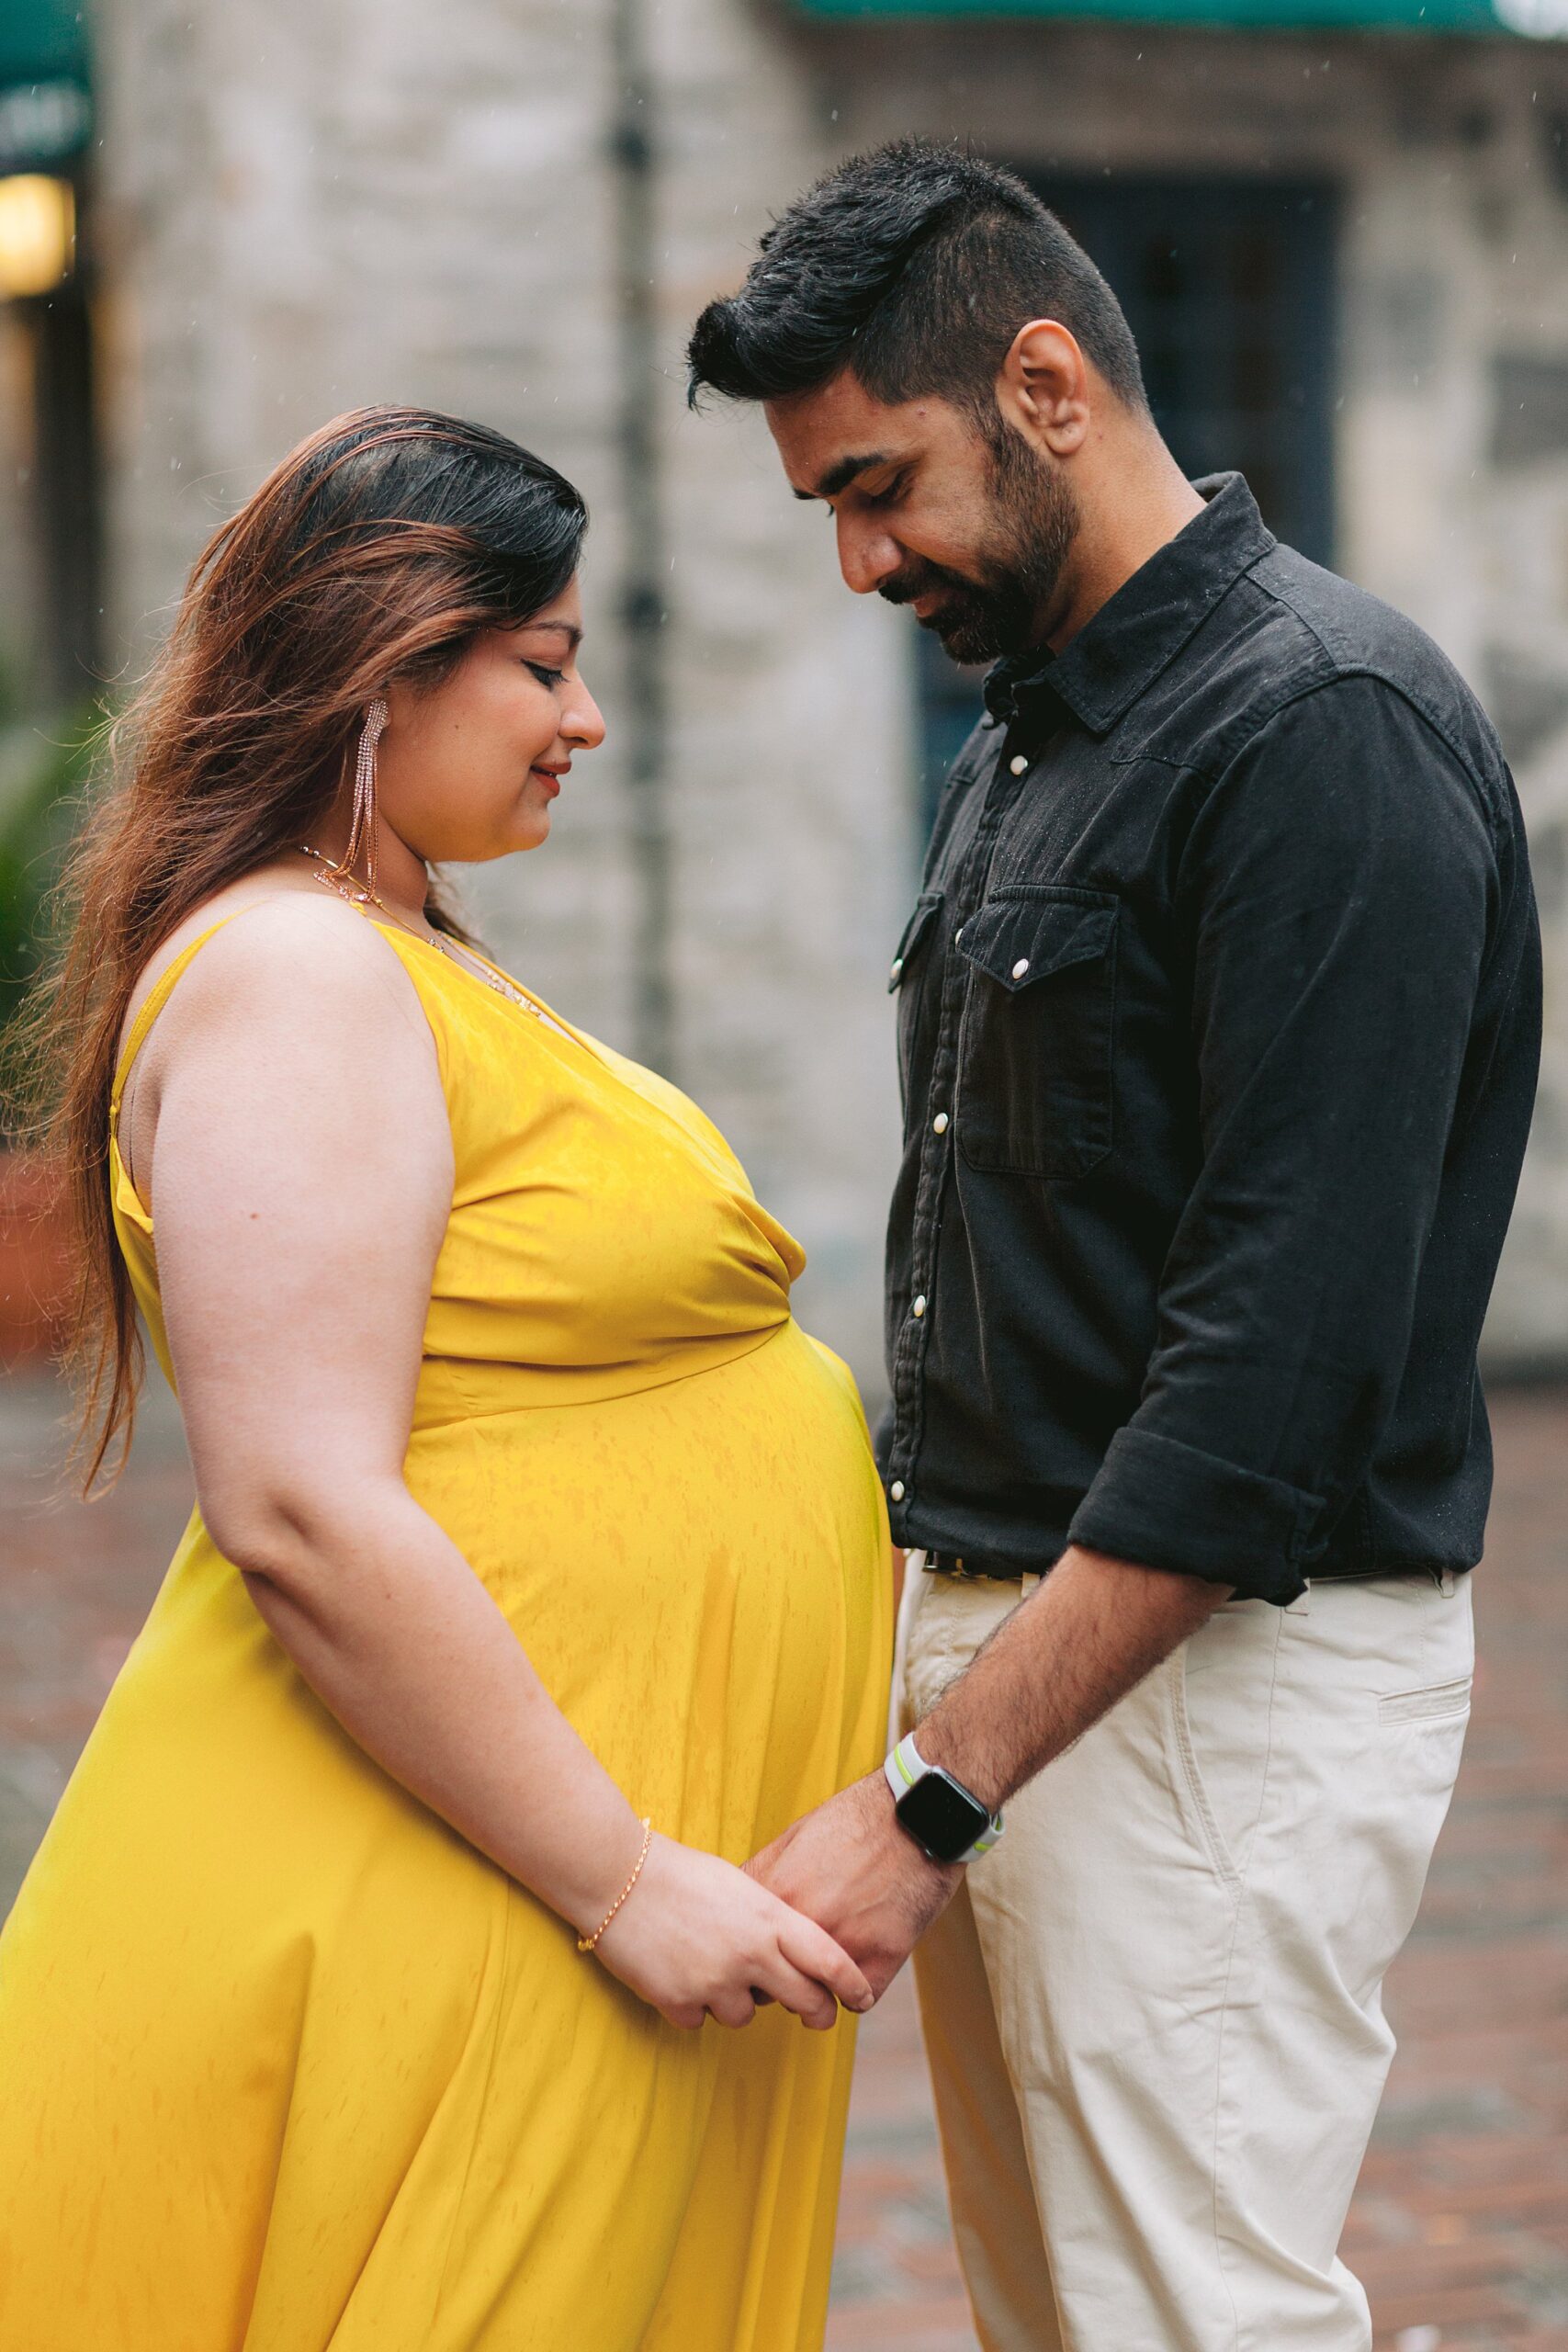 Romantic maternity session featuring a couple in love amidst the unique architecture of Old Port, Montreal.